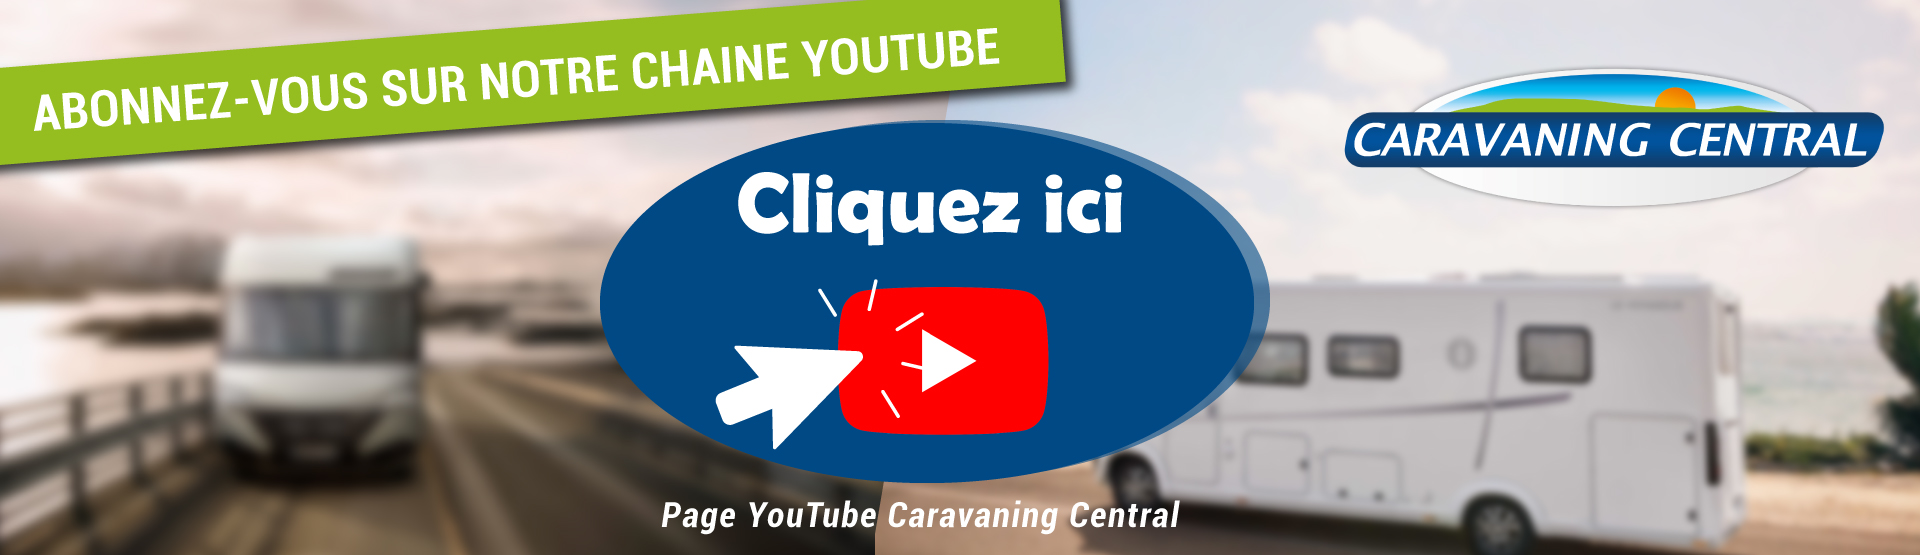 CHAINE YOUTUBE CARAVANING CENTRAL